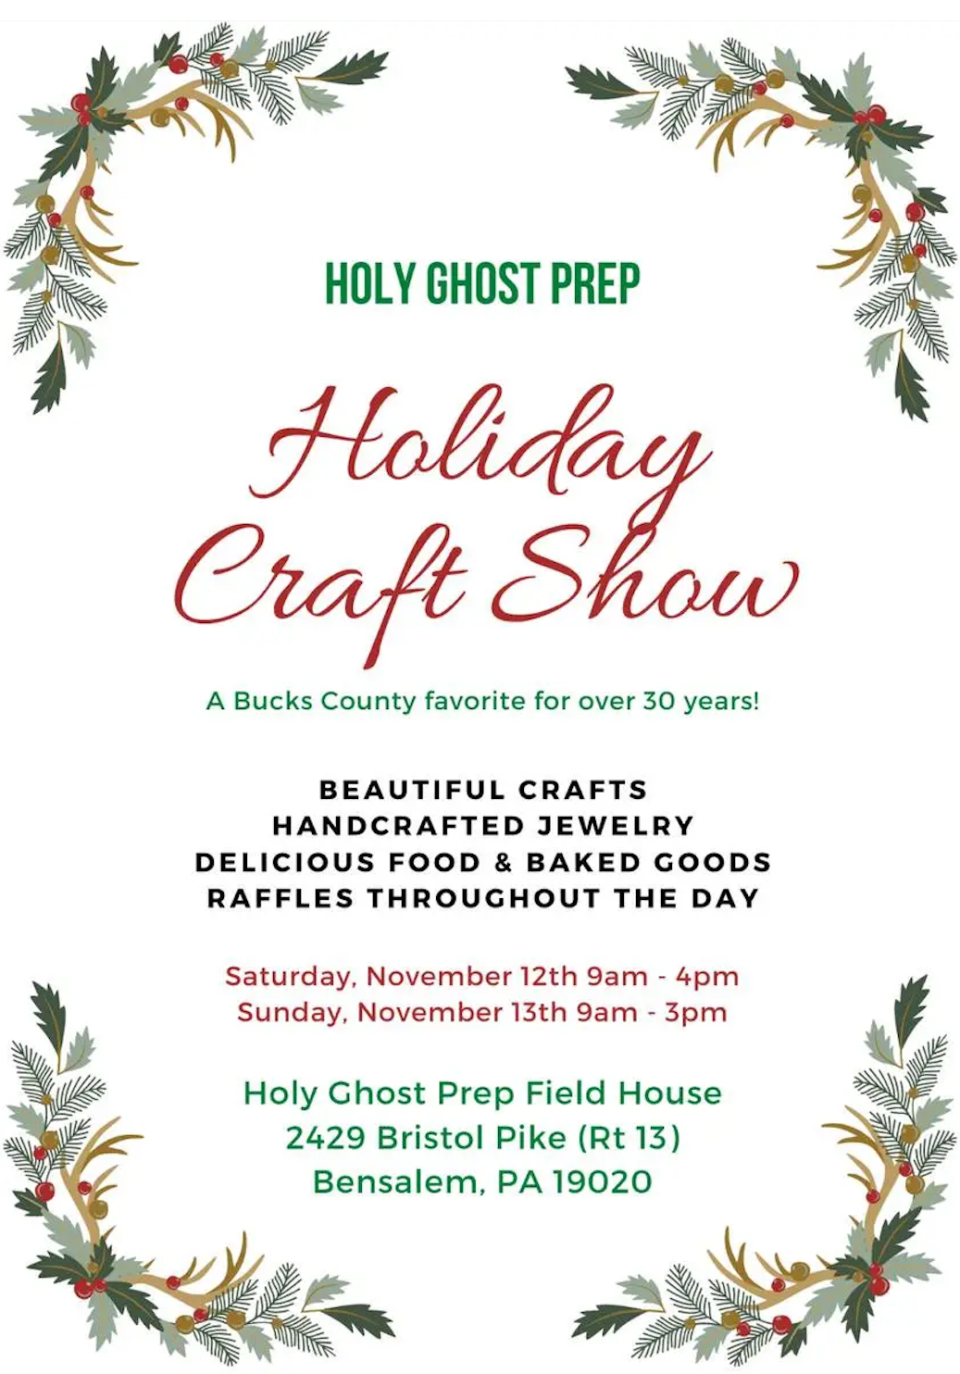 The HGP Mothers’ Guild runs one of the most successful craft shows in the area.